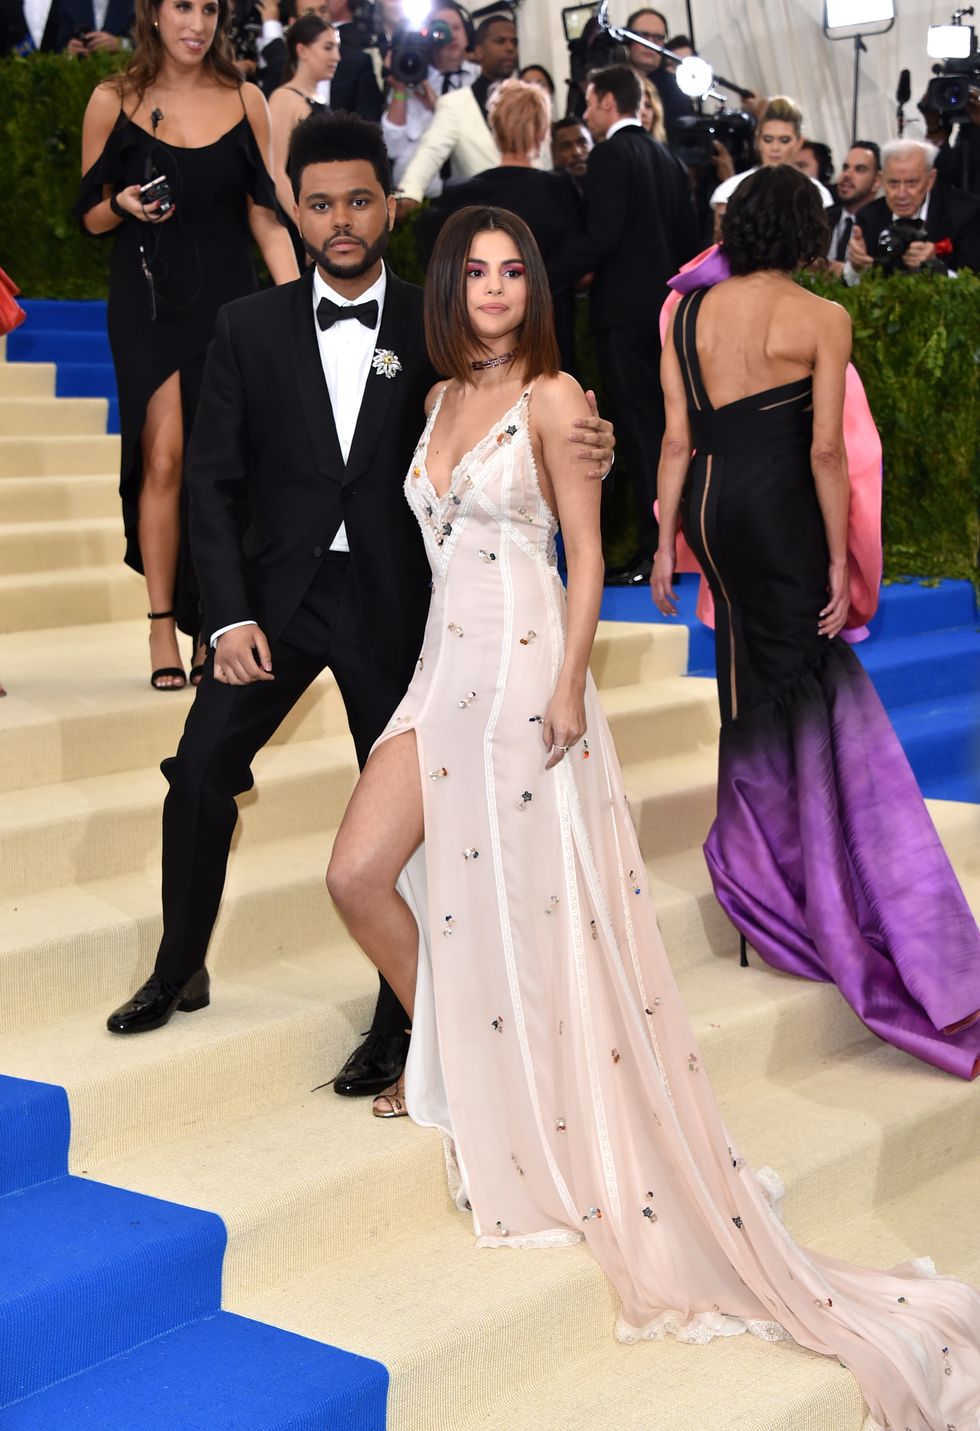 Selena Gomez does date-night dressing as she makes her red carpet